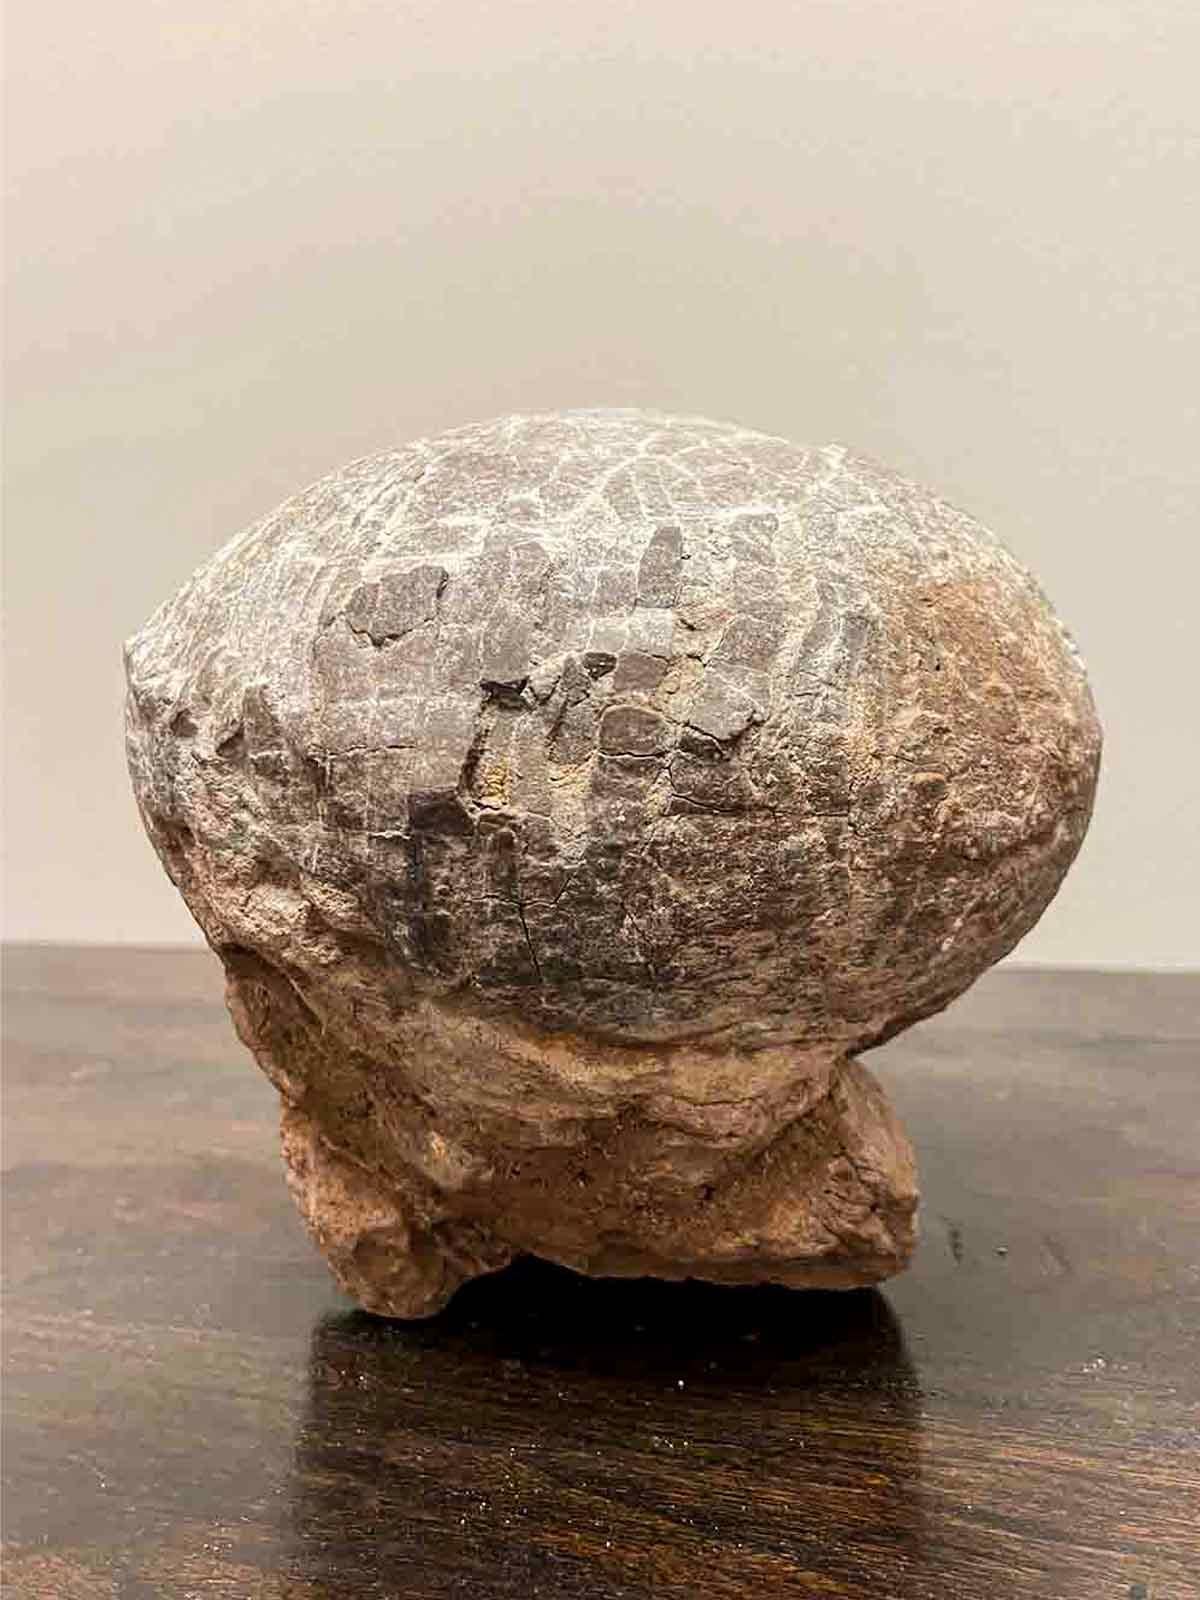 Prehistoric Chinese Petrified Dinosaur Egg with Cracked Surface 11